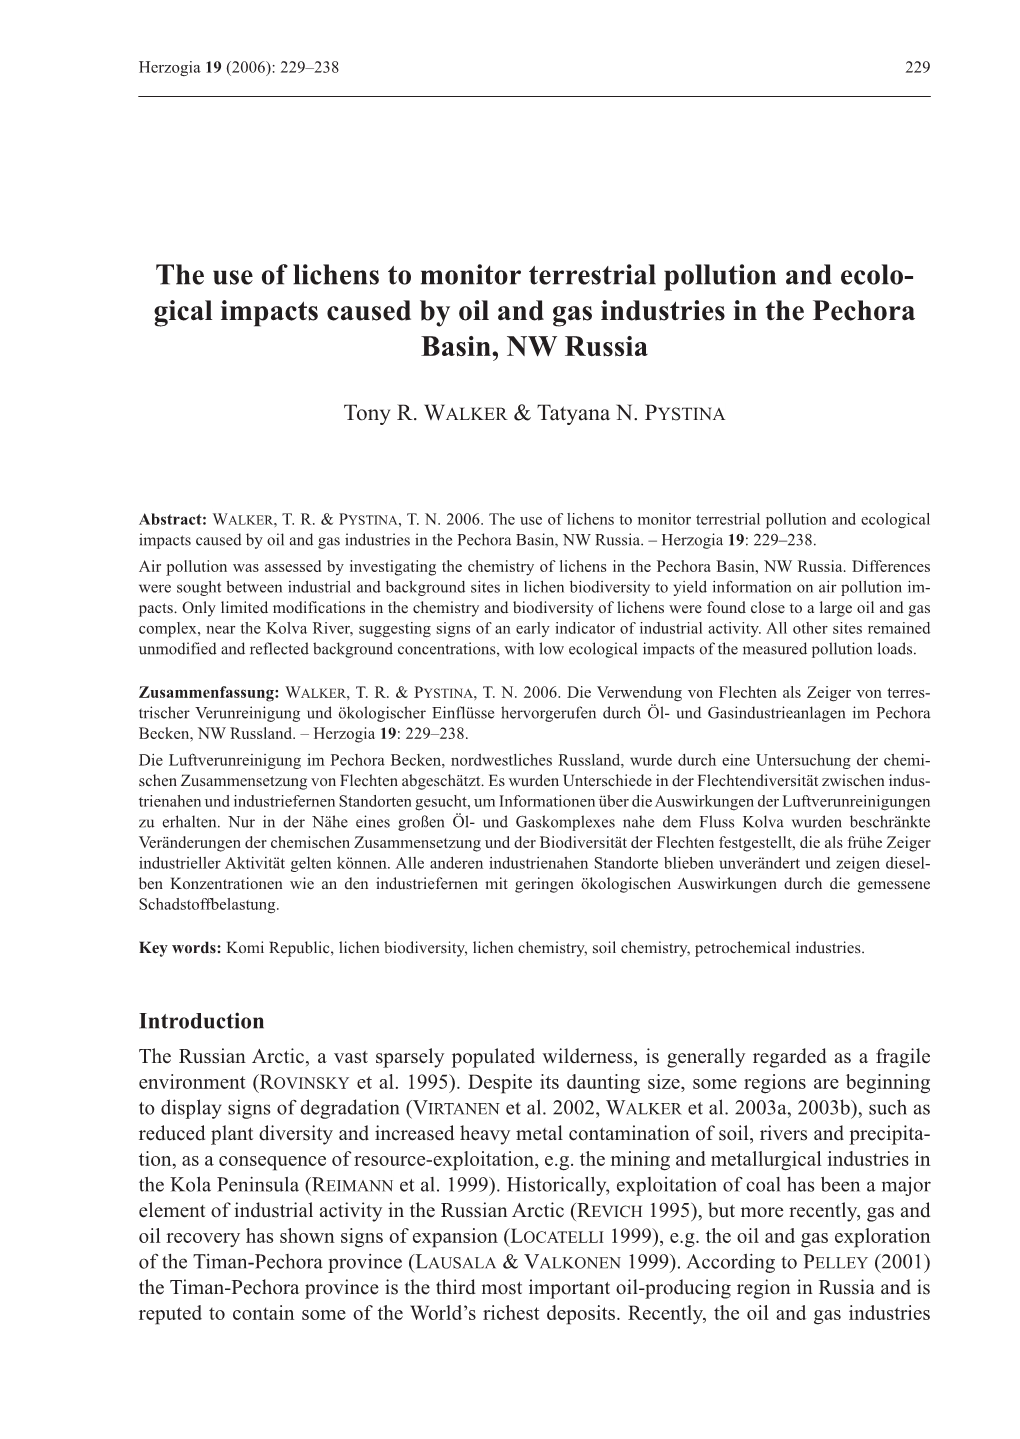 The Use of Lichens to Monitor Terrestrial Pollution and Ecolo- Gical Impacts Caused by Oil and Gas Industries in the Pechora Basin, NW Russia